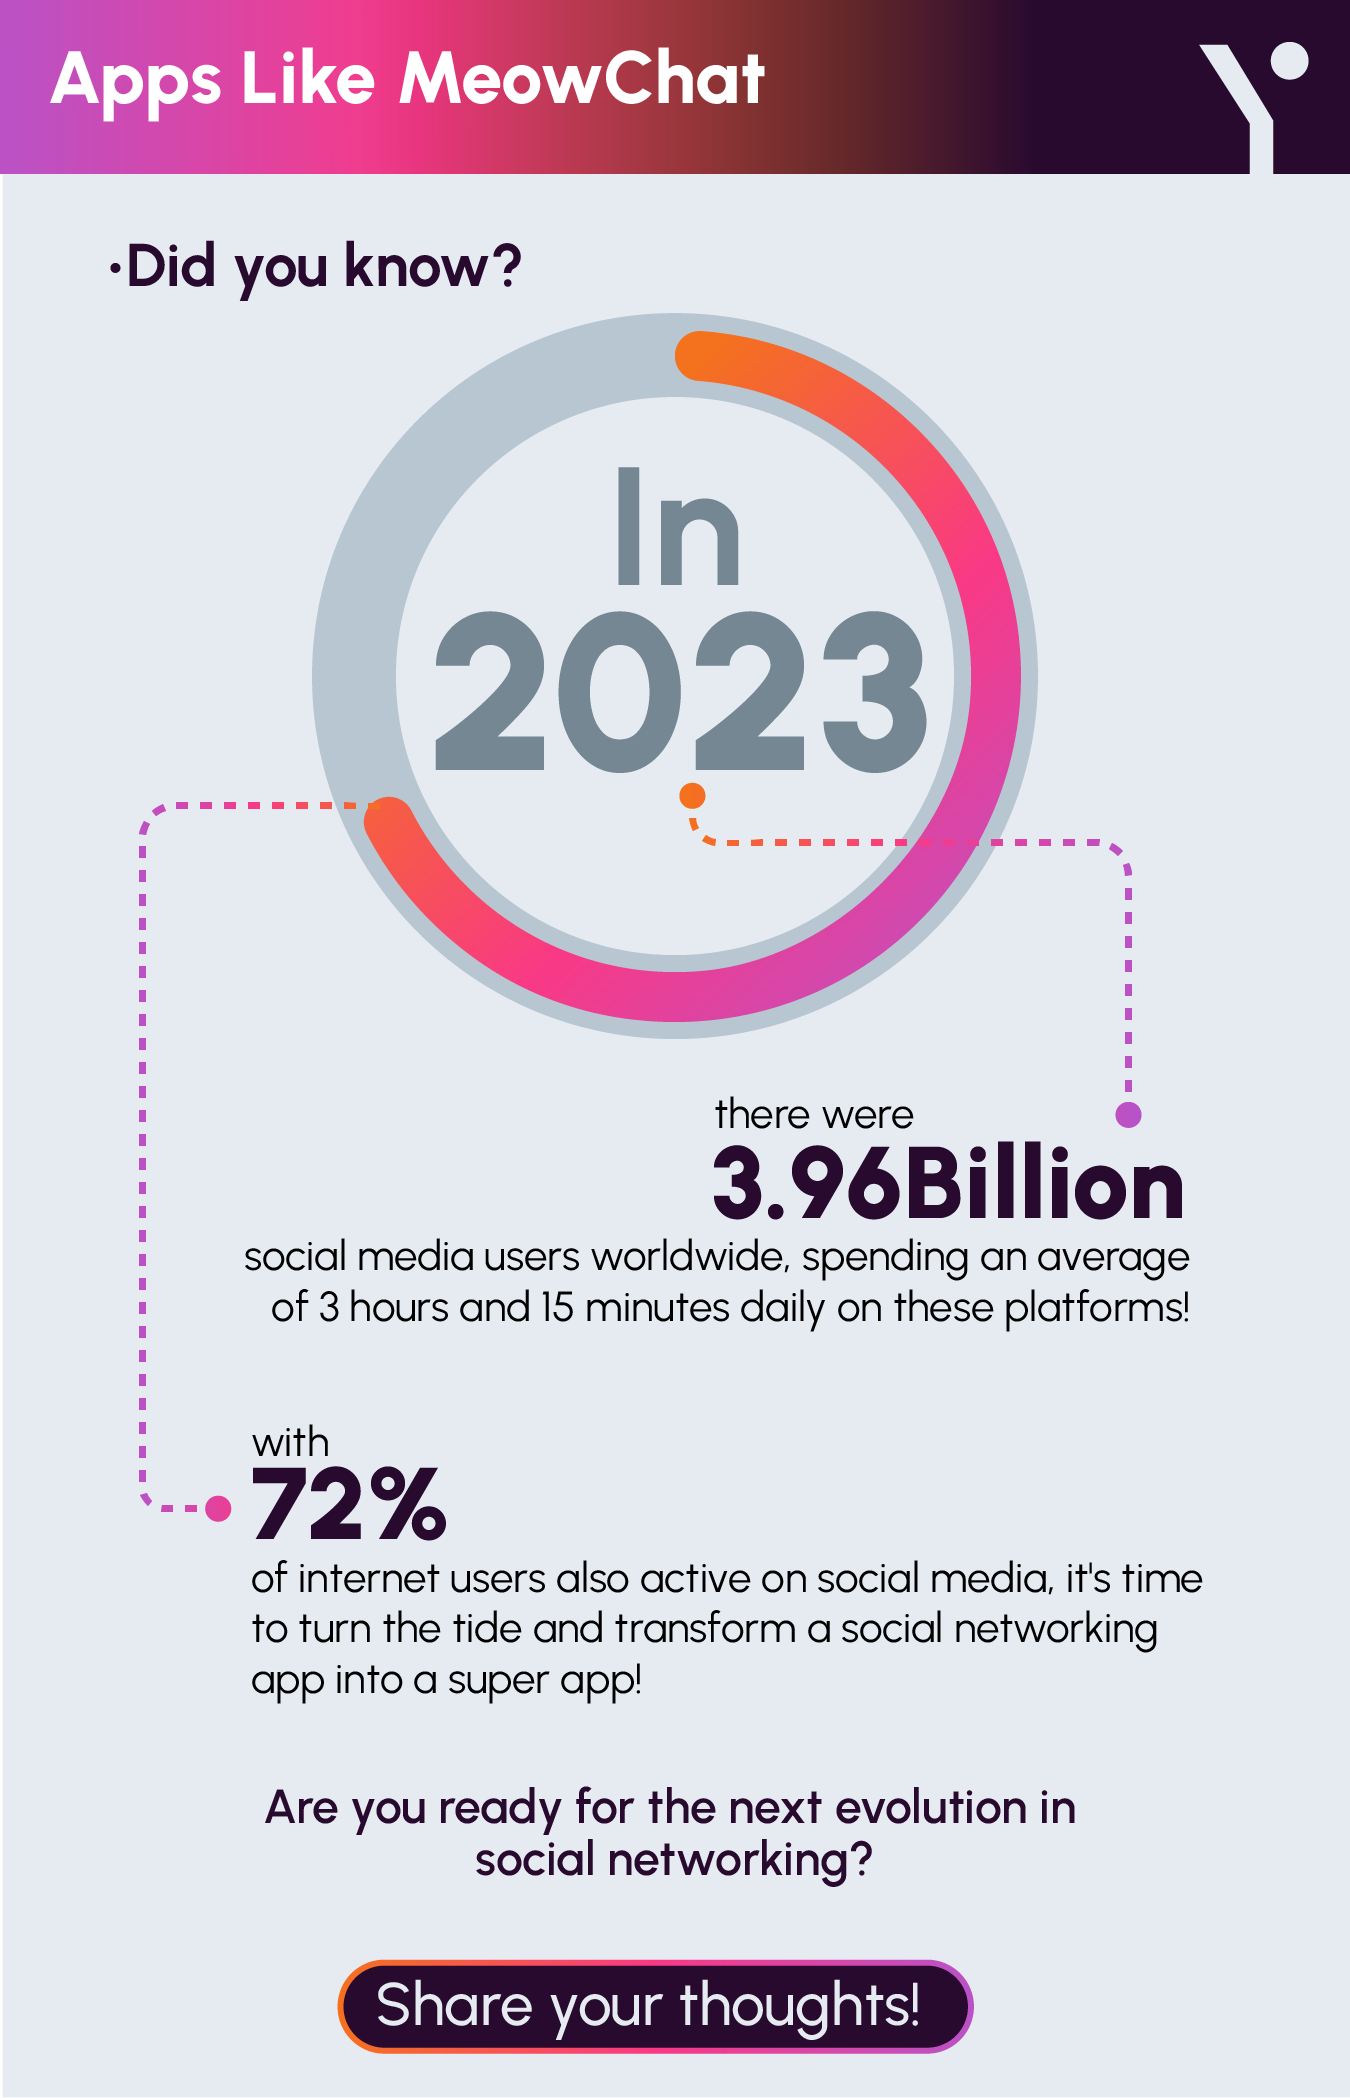 Key pointers on How to Build Social Networking Apps Like MeowChat in infographic form